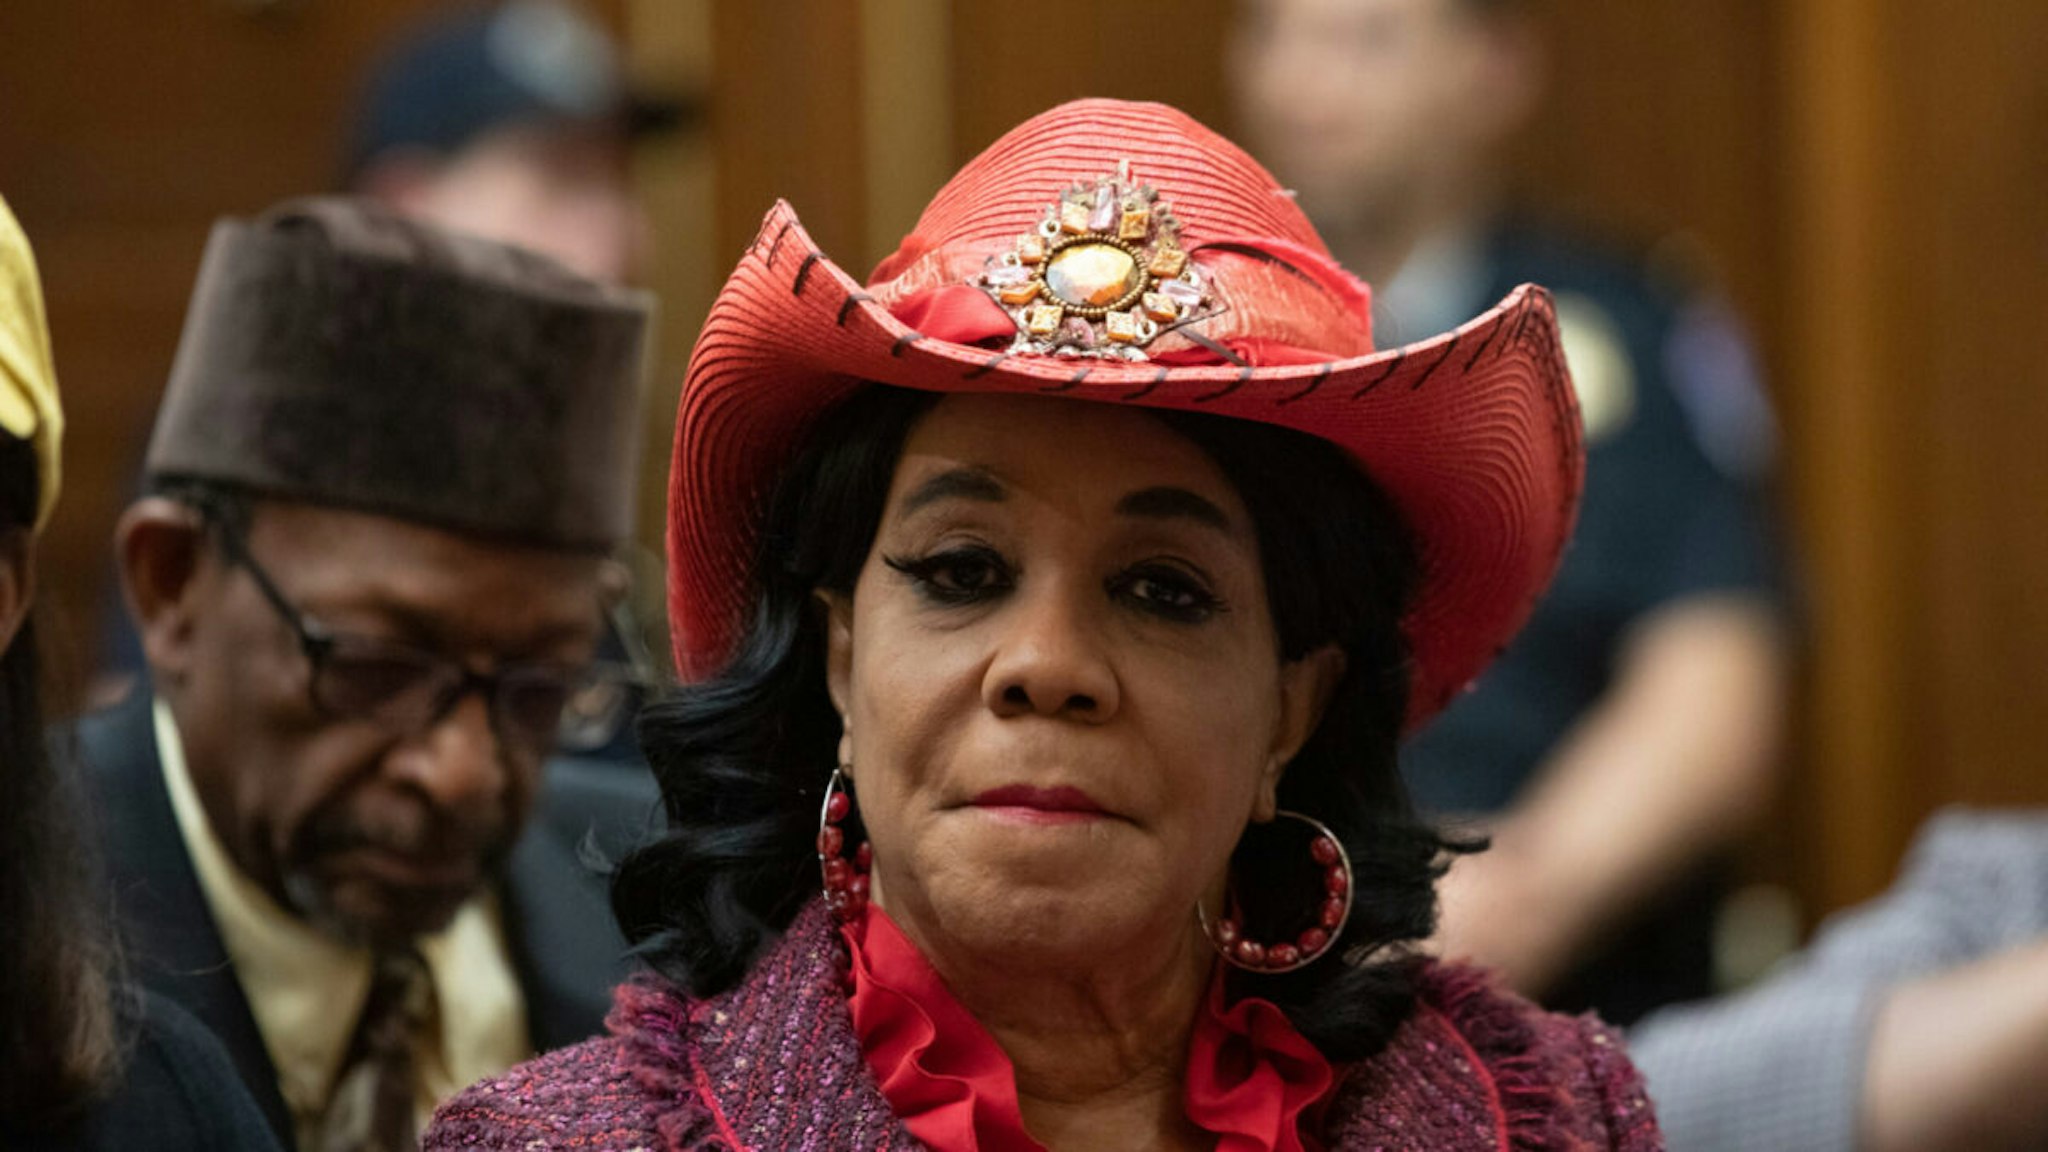 Rep. Frederica Wilson (D-FL 24th District), attends the hearing about reparations for the descendants of slaves before the House Judiciary Subcommittee on the Constitution, Civil Rights and Civil Liberties, on Capitol Hill in Washington, D.C. on Wednesday June 19, 2019.